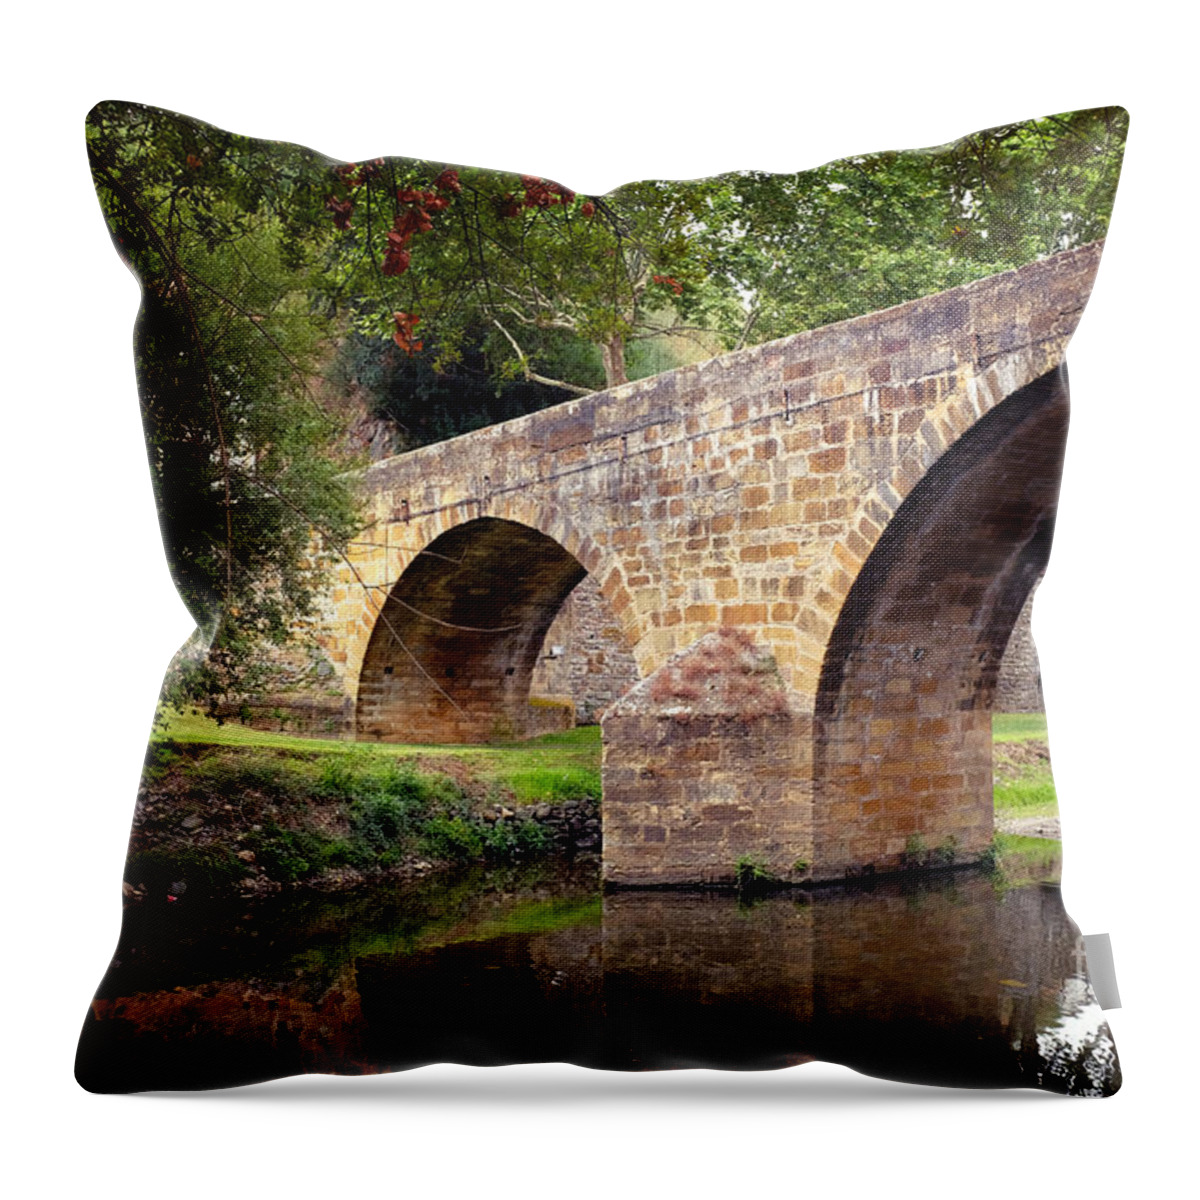 Ancient Throw Pillow featuring the photograph Gois Bridge by Carlos Caetano